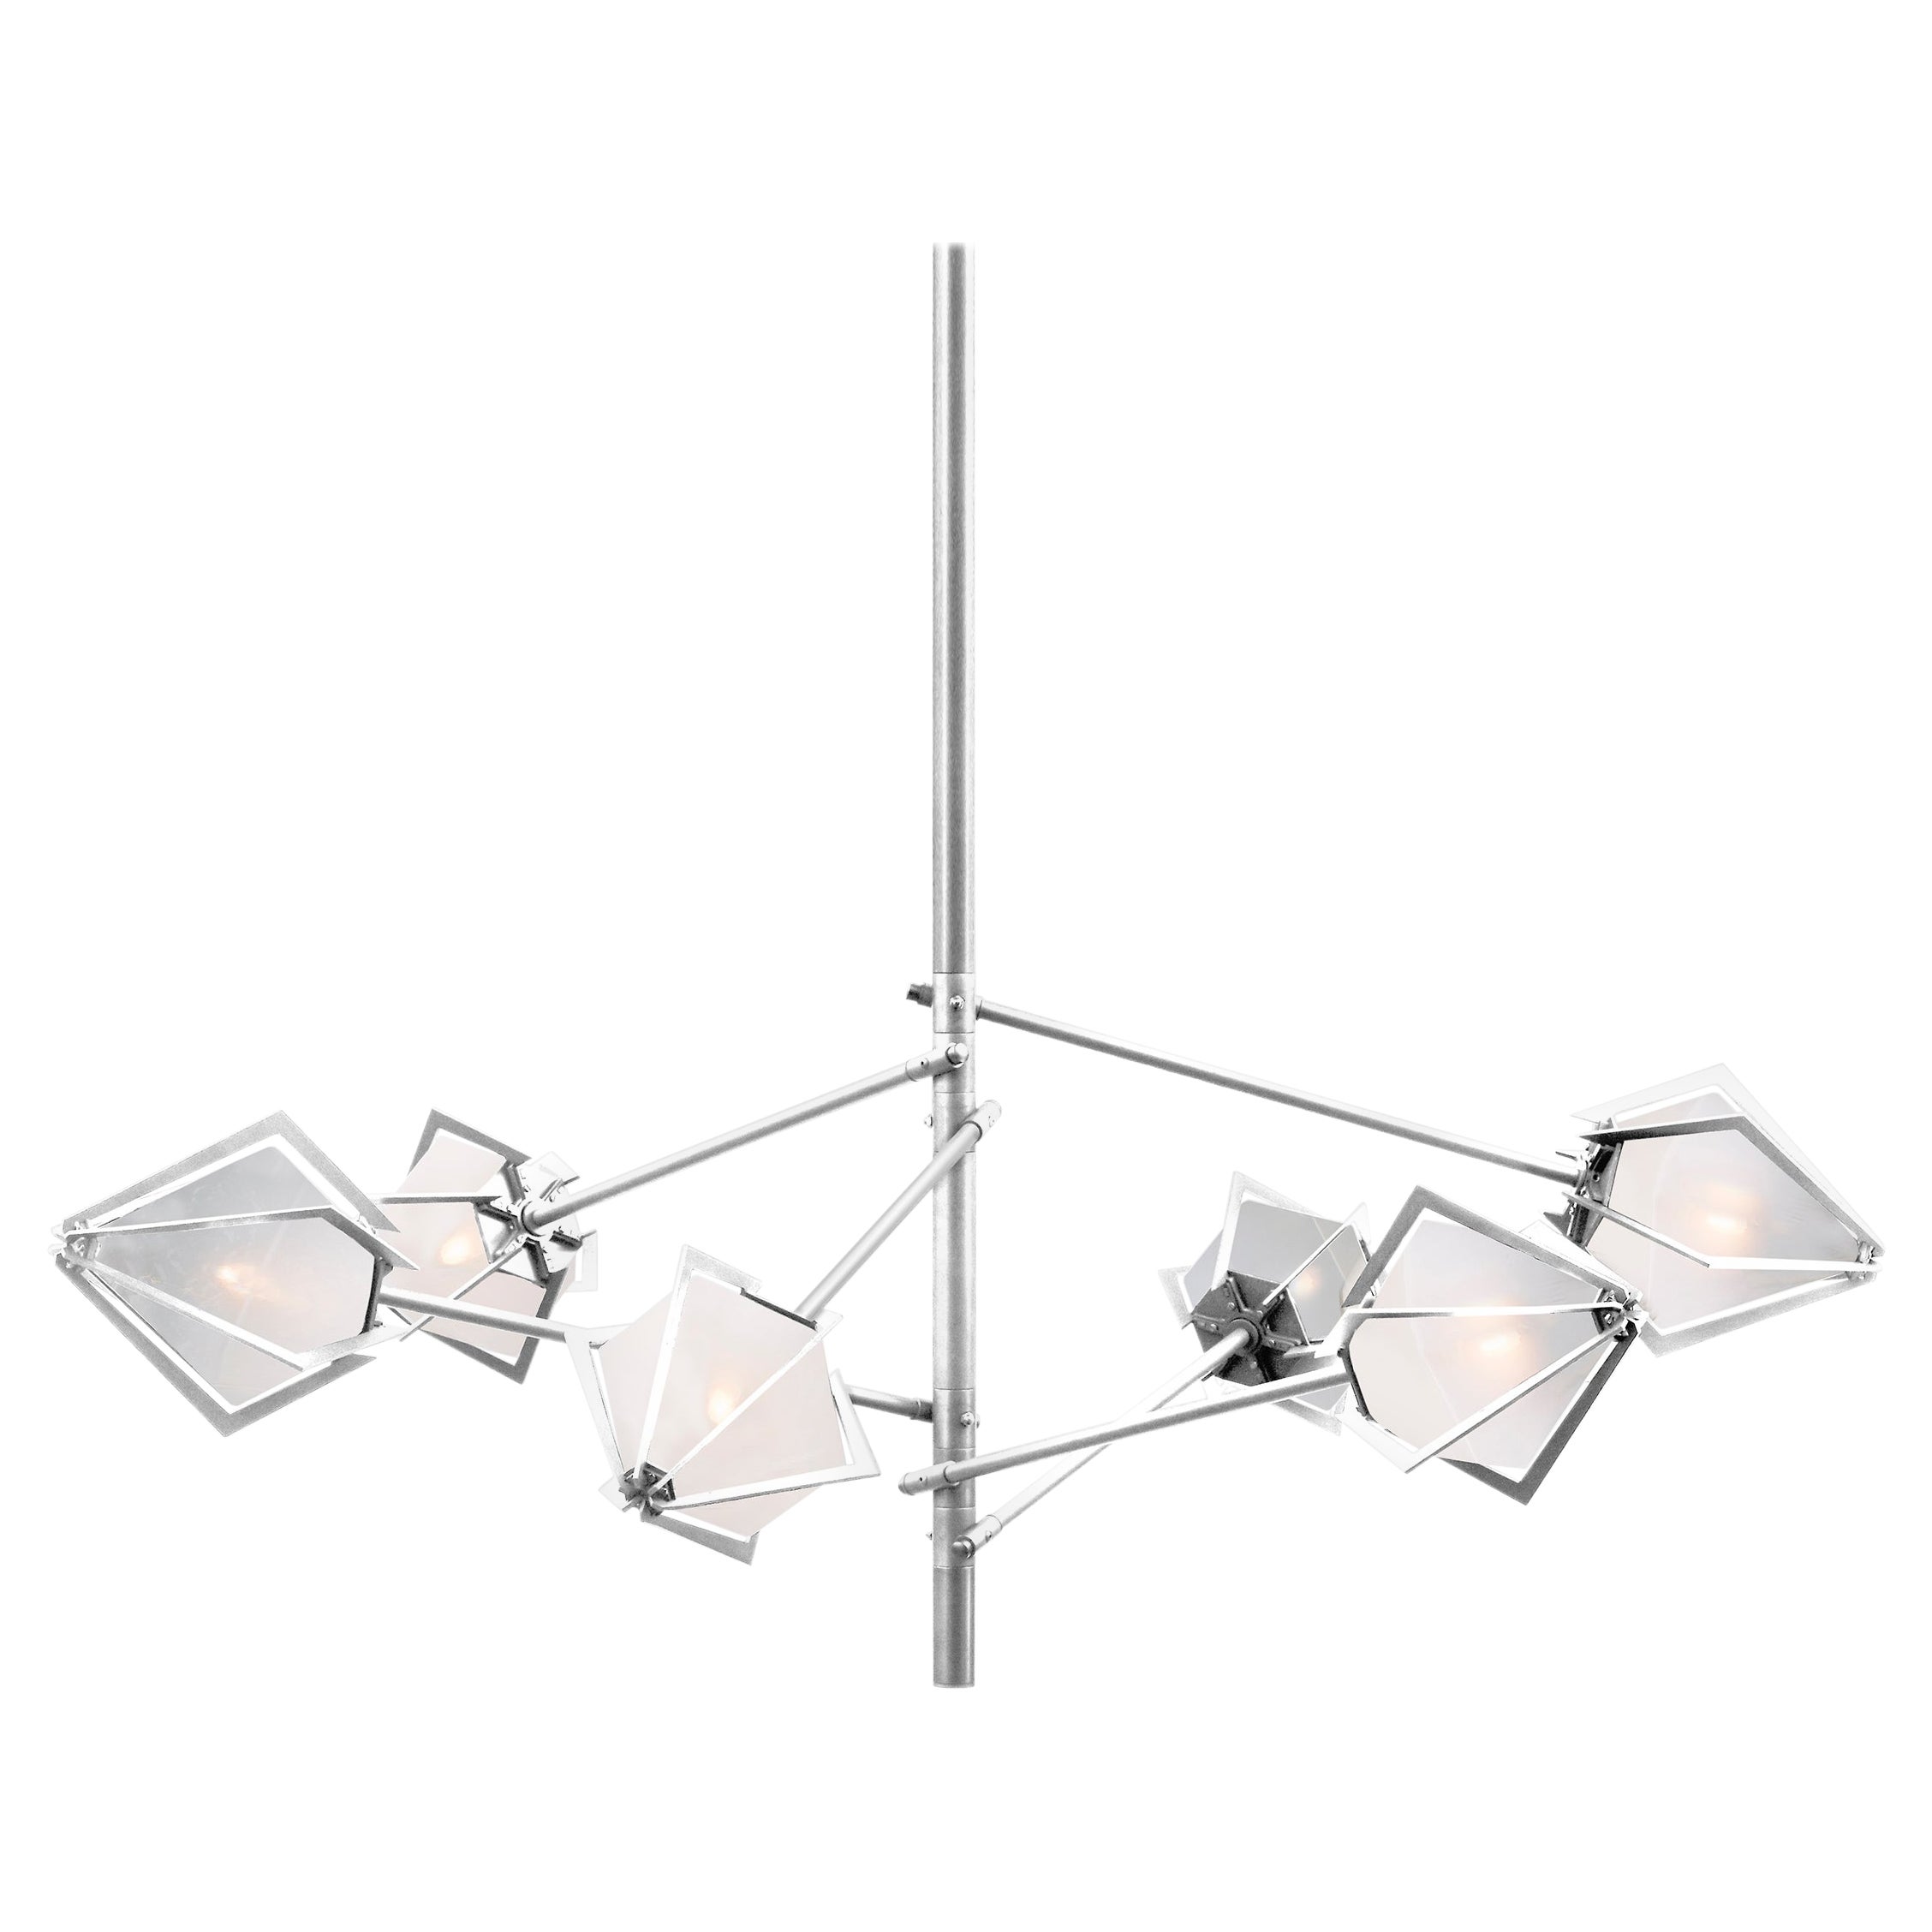 Harlow Spoke Chandelier Small in Satin Nickel and Alabaster White Glass For Sale